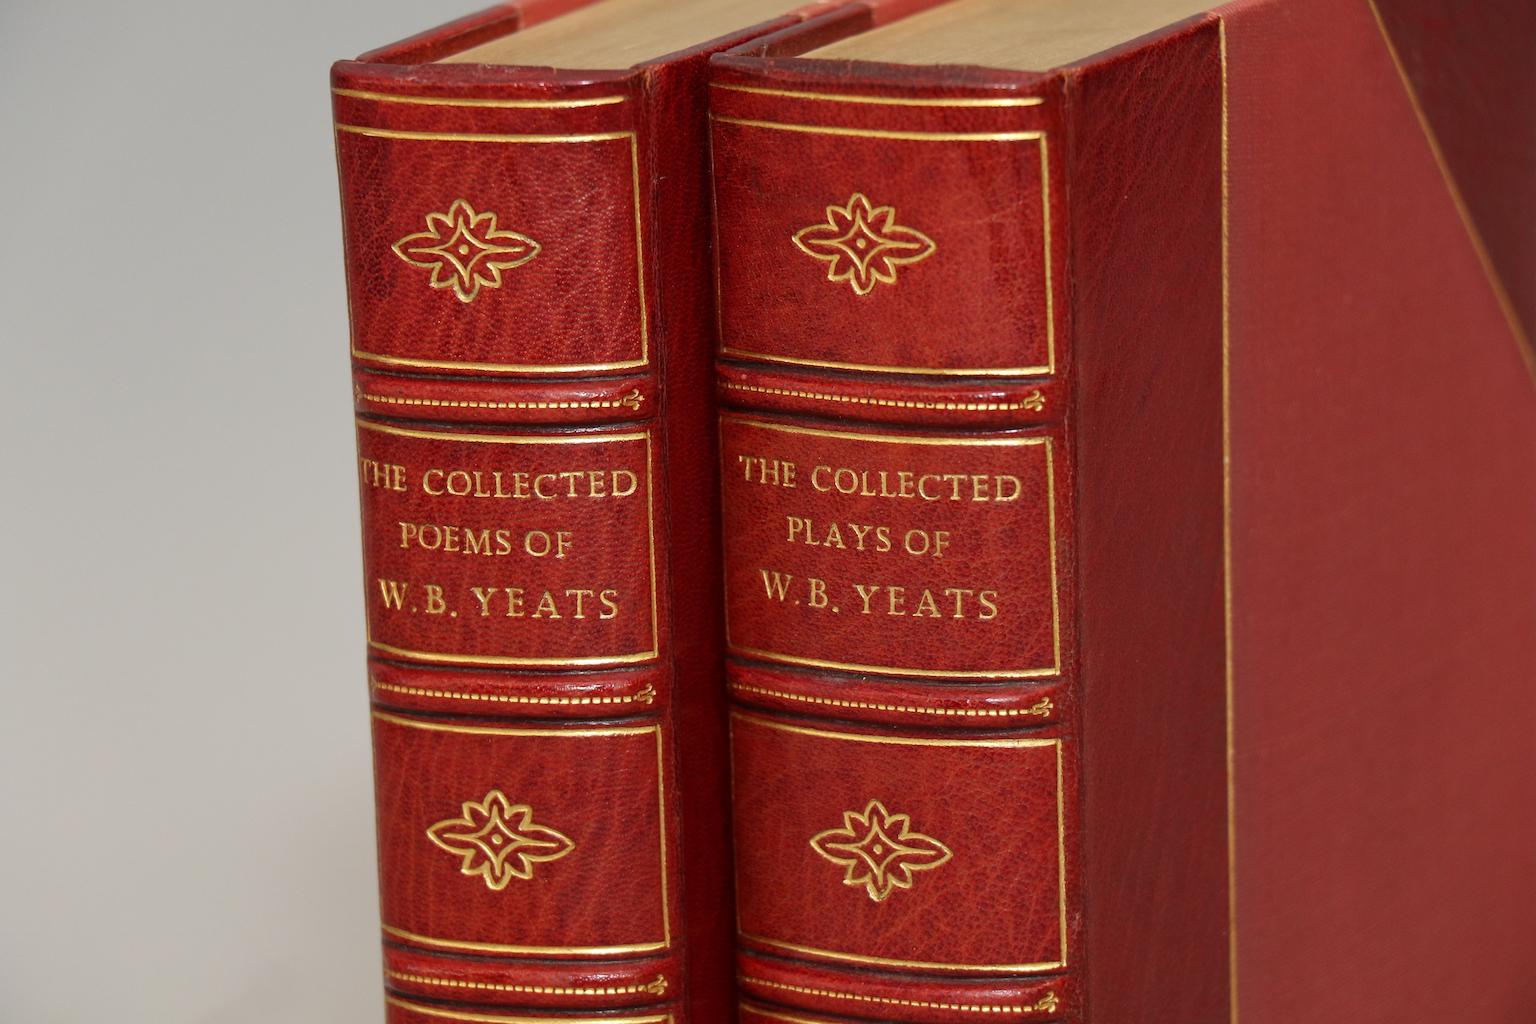 Leatherbound. 2 volumes. Bound in 3/4 red Morocco with top edges gilt, raised bands, & gilt panels. Very good. Published in London by MacMillan & Co., Ltd. in 1963.

All listed dimensions are for a single volume.